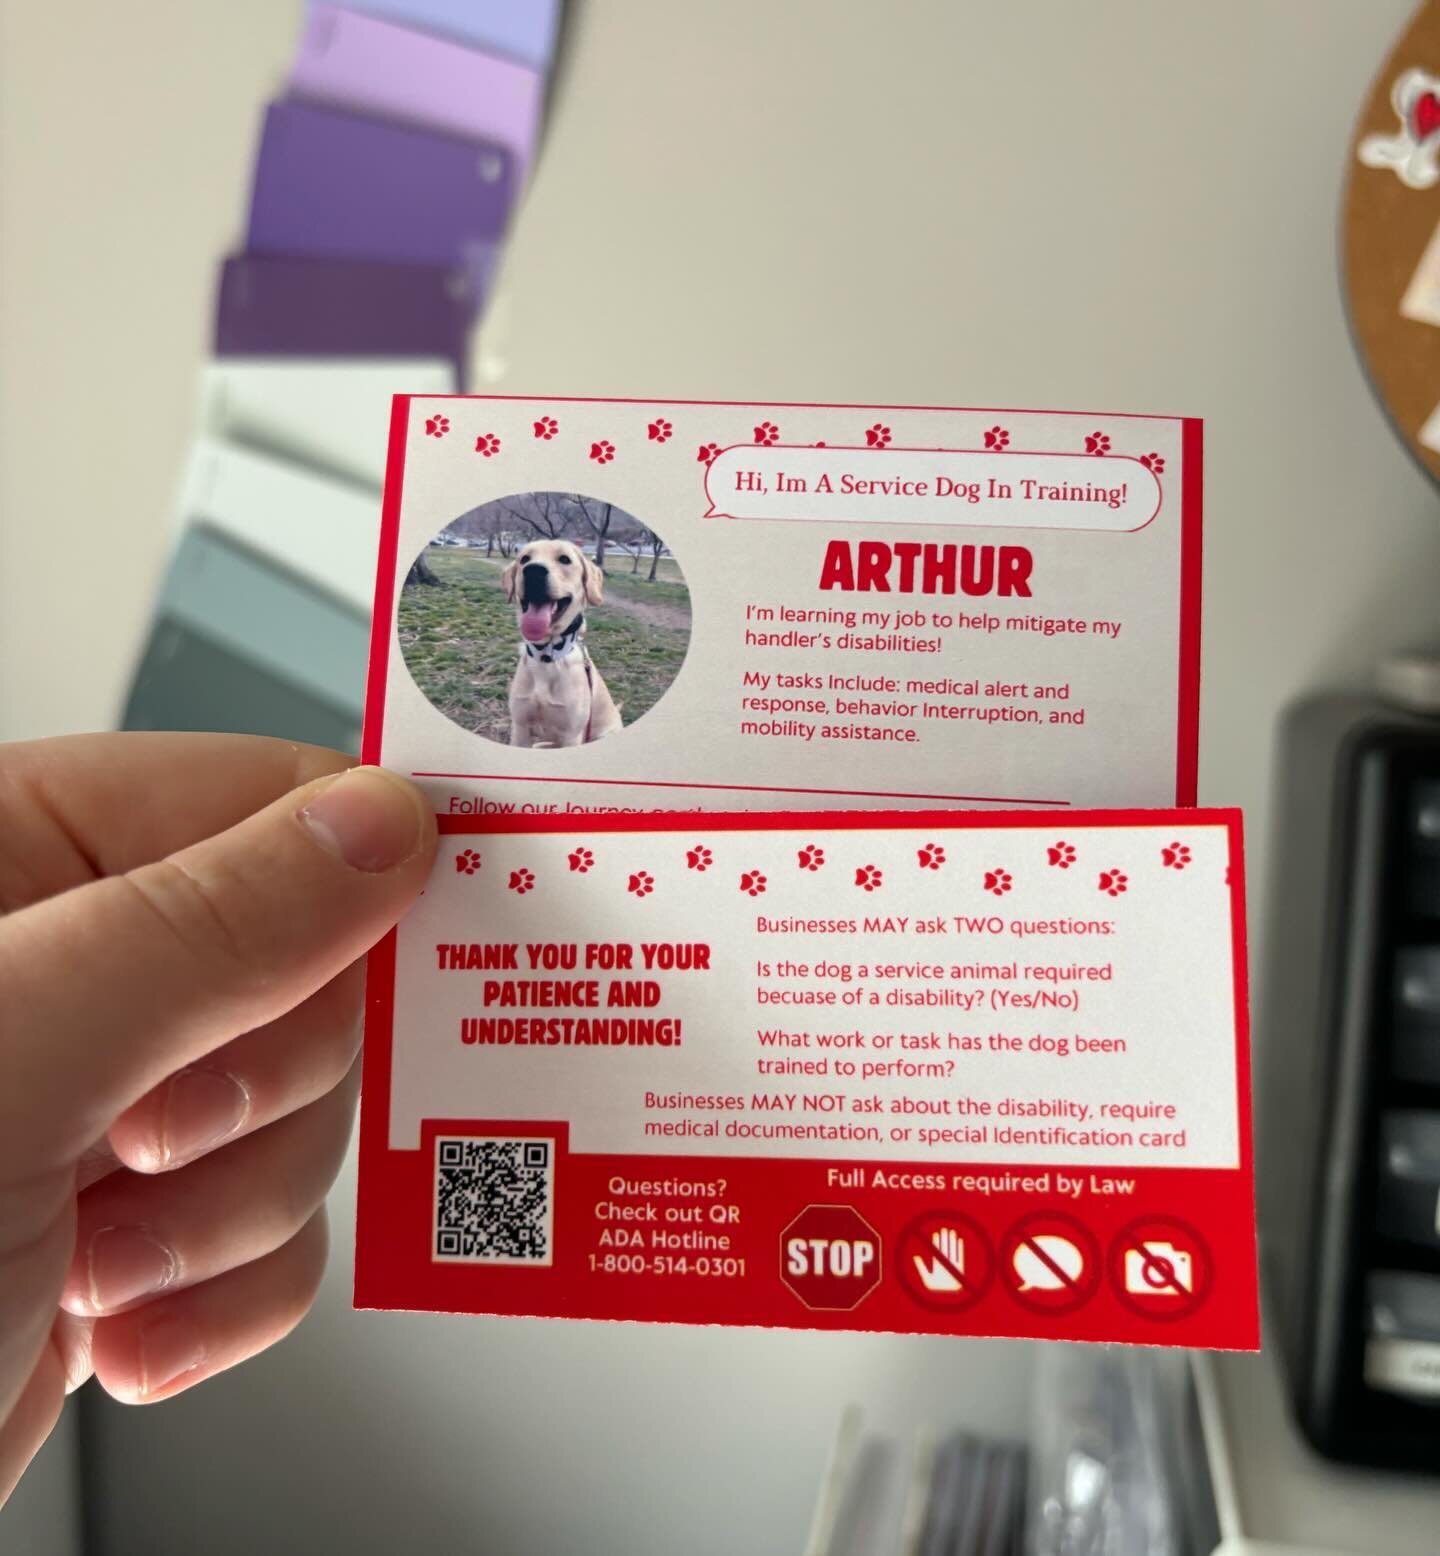 Printed and shipped these custom ADA/ Assistance Dog cards today! Great for education for the public and for advocating for your pup! 🐕&zwj;🦺 ❤️

#servicedog #assistancedog #servicedogintraining #gear #servicedogpatches #servicedogsofinstagram #sma